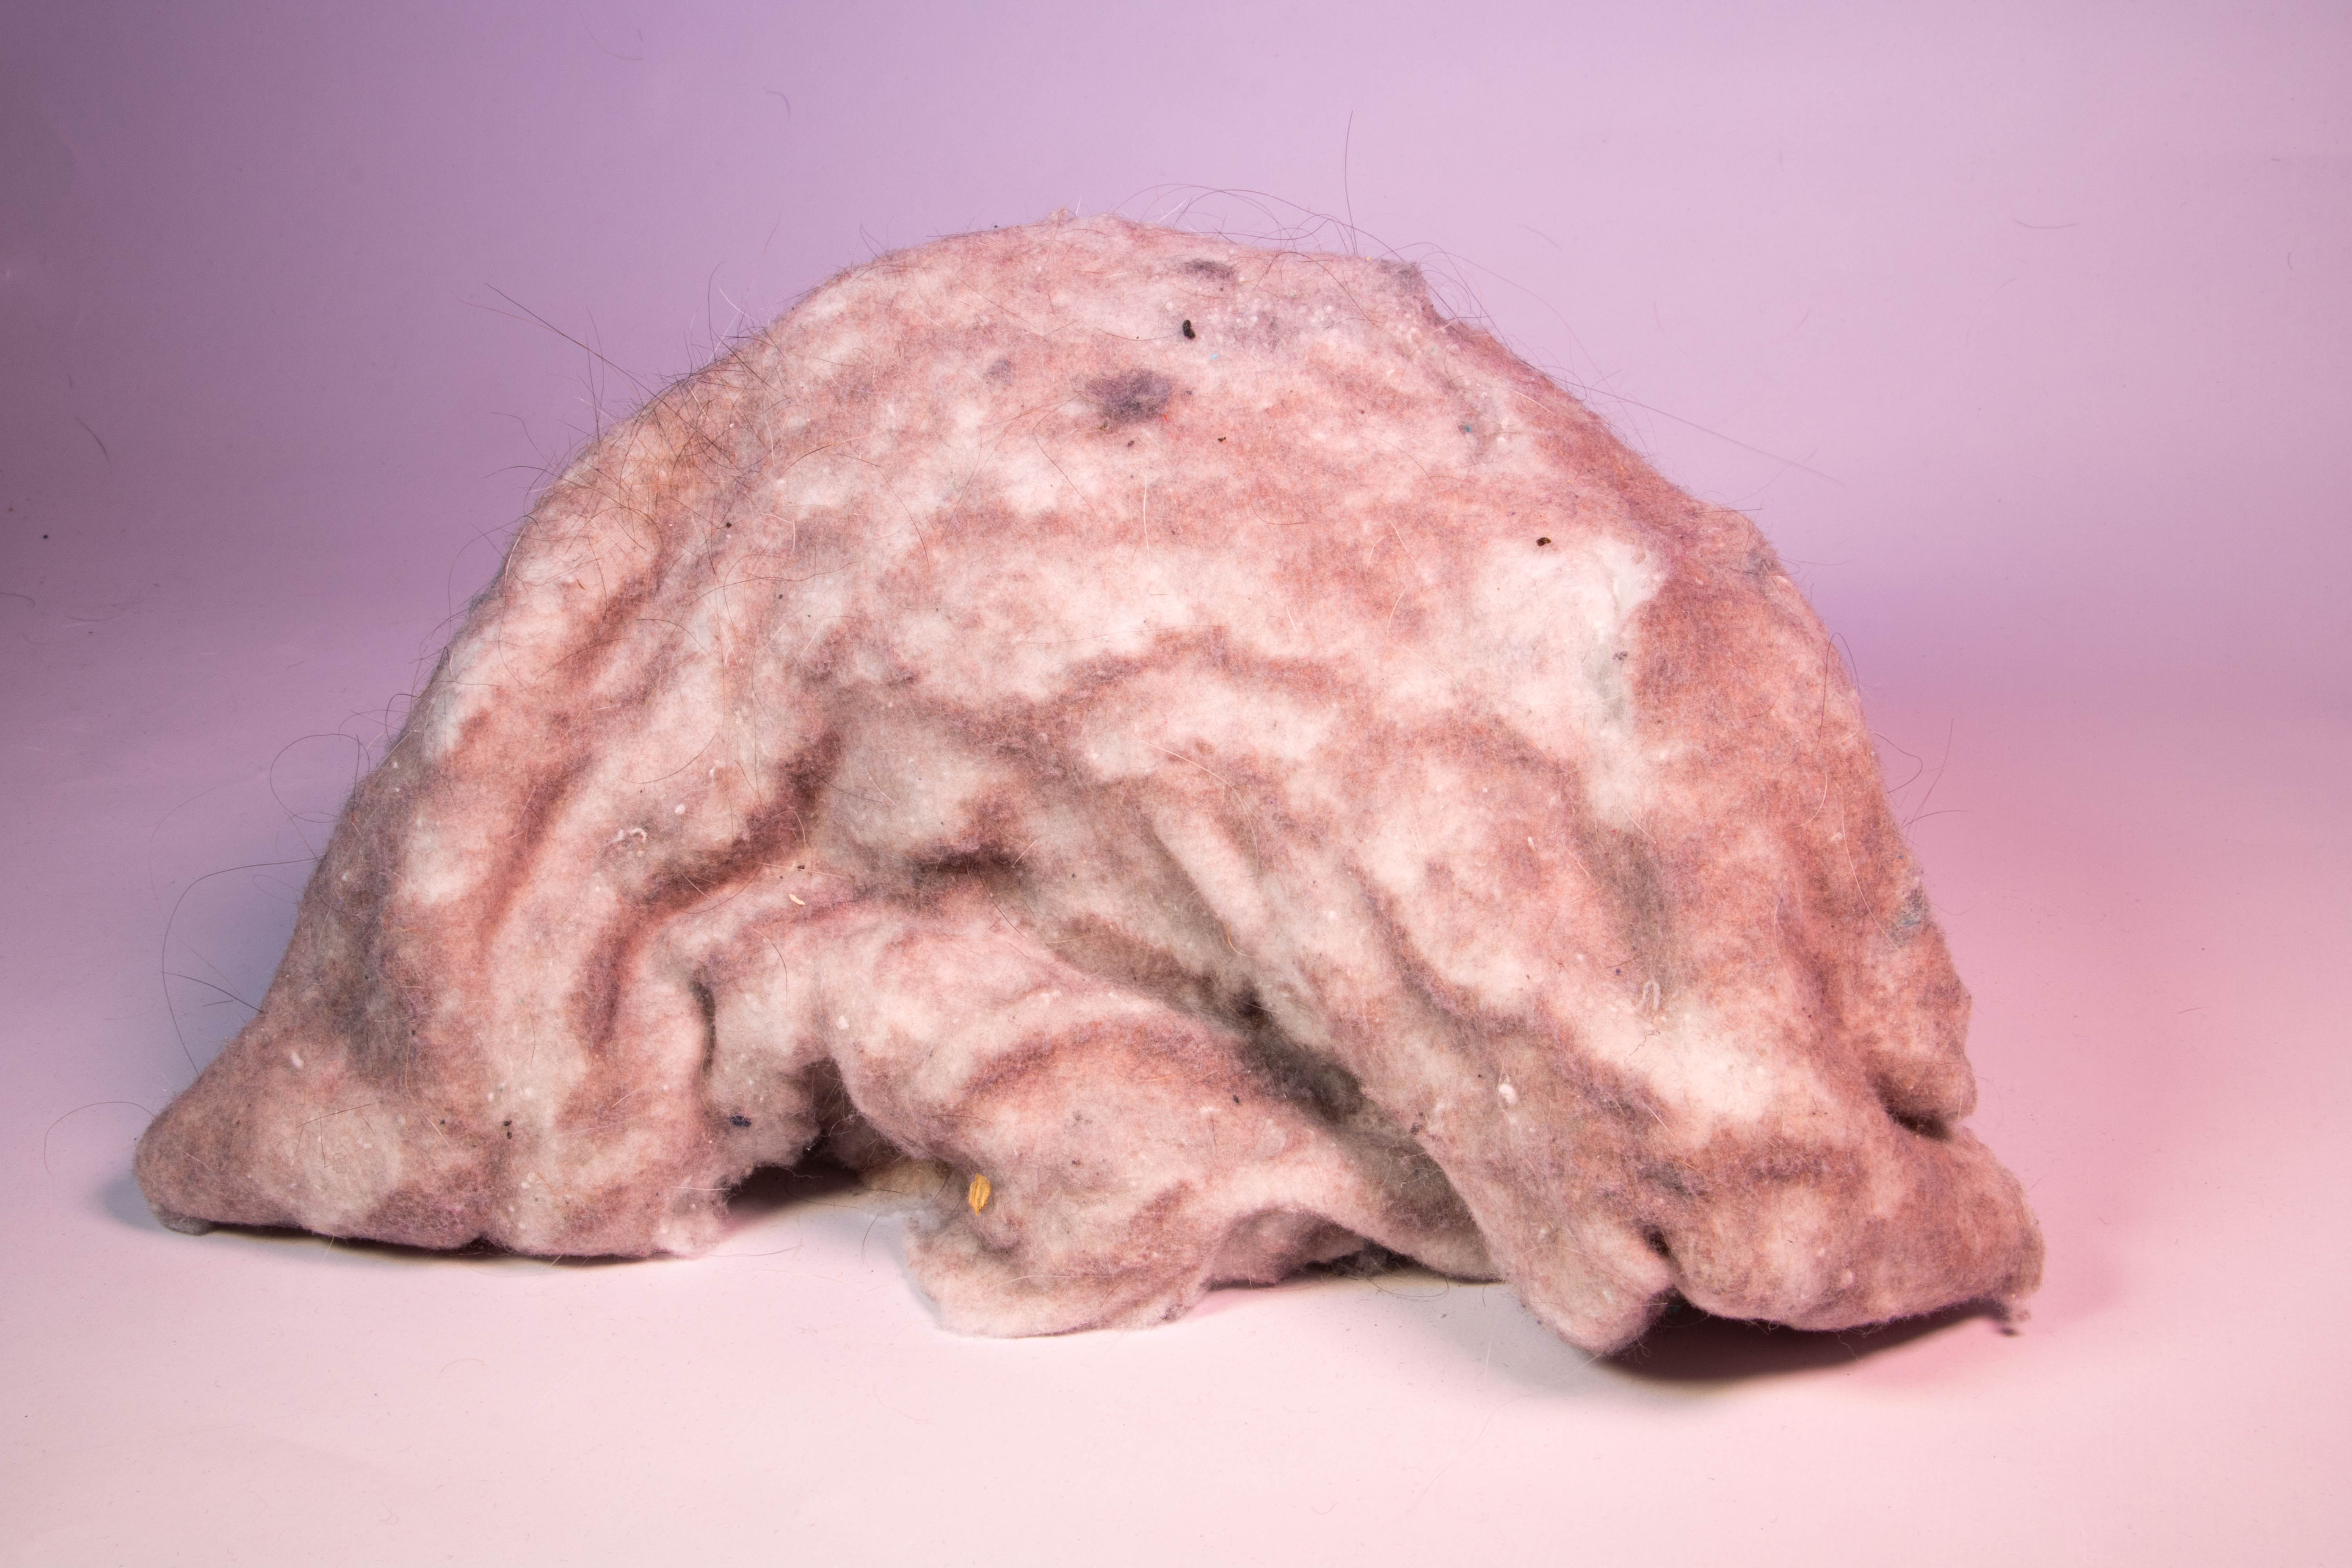 A pink and well lit form of lint